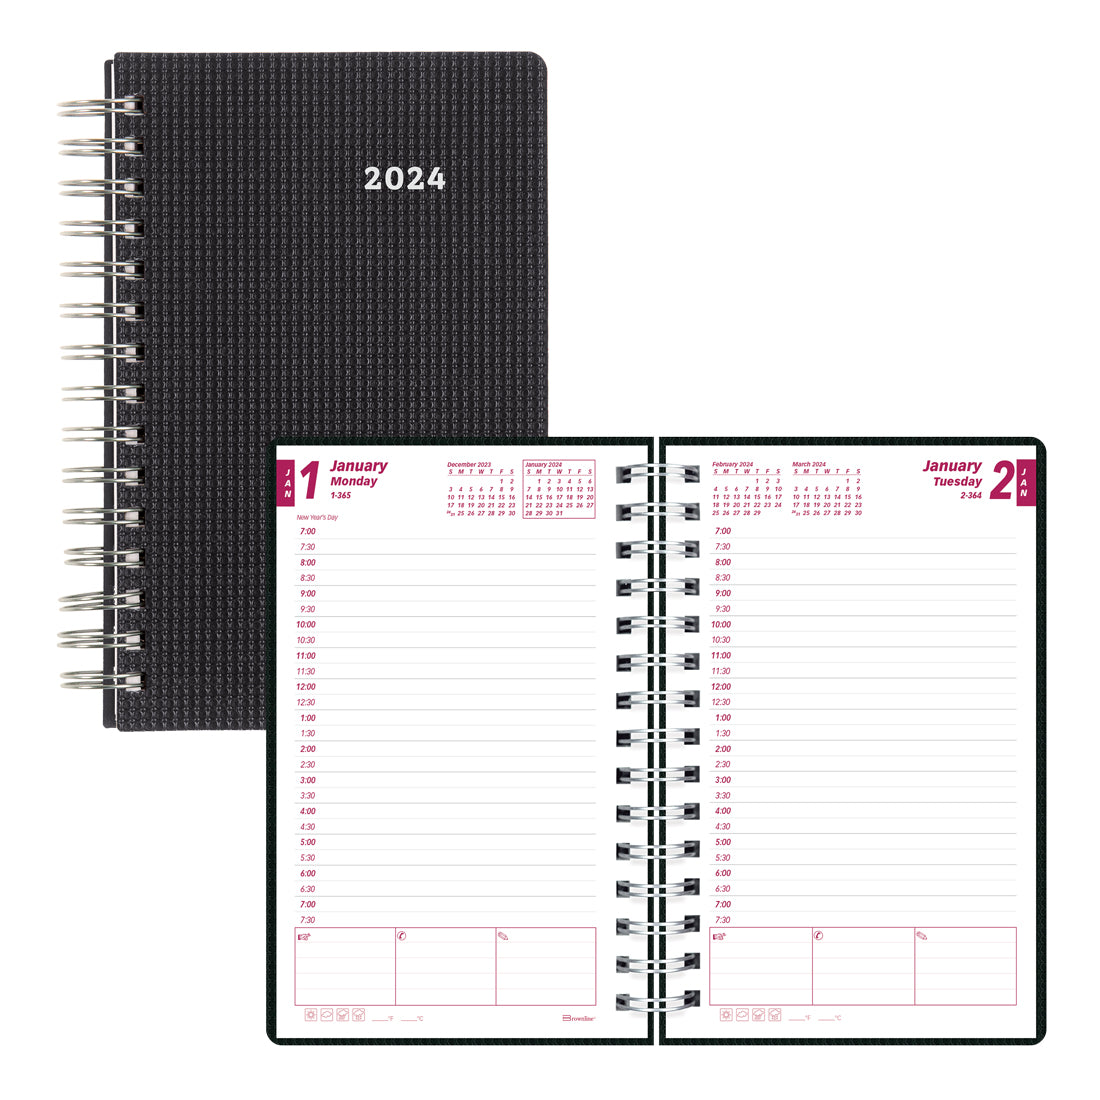 2024 Meraki Planners Personalized Planner Appointment Book 